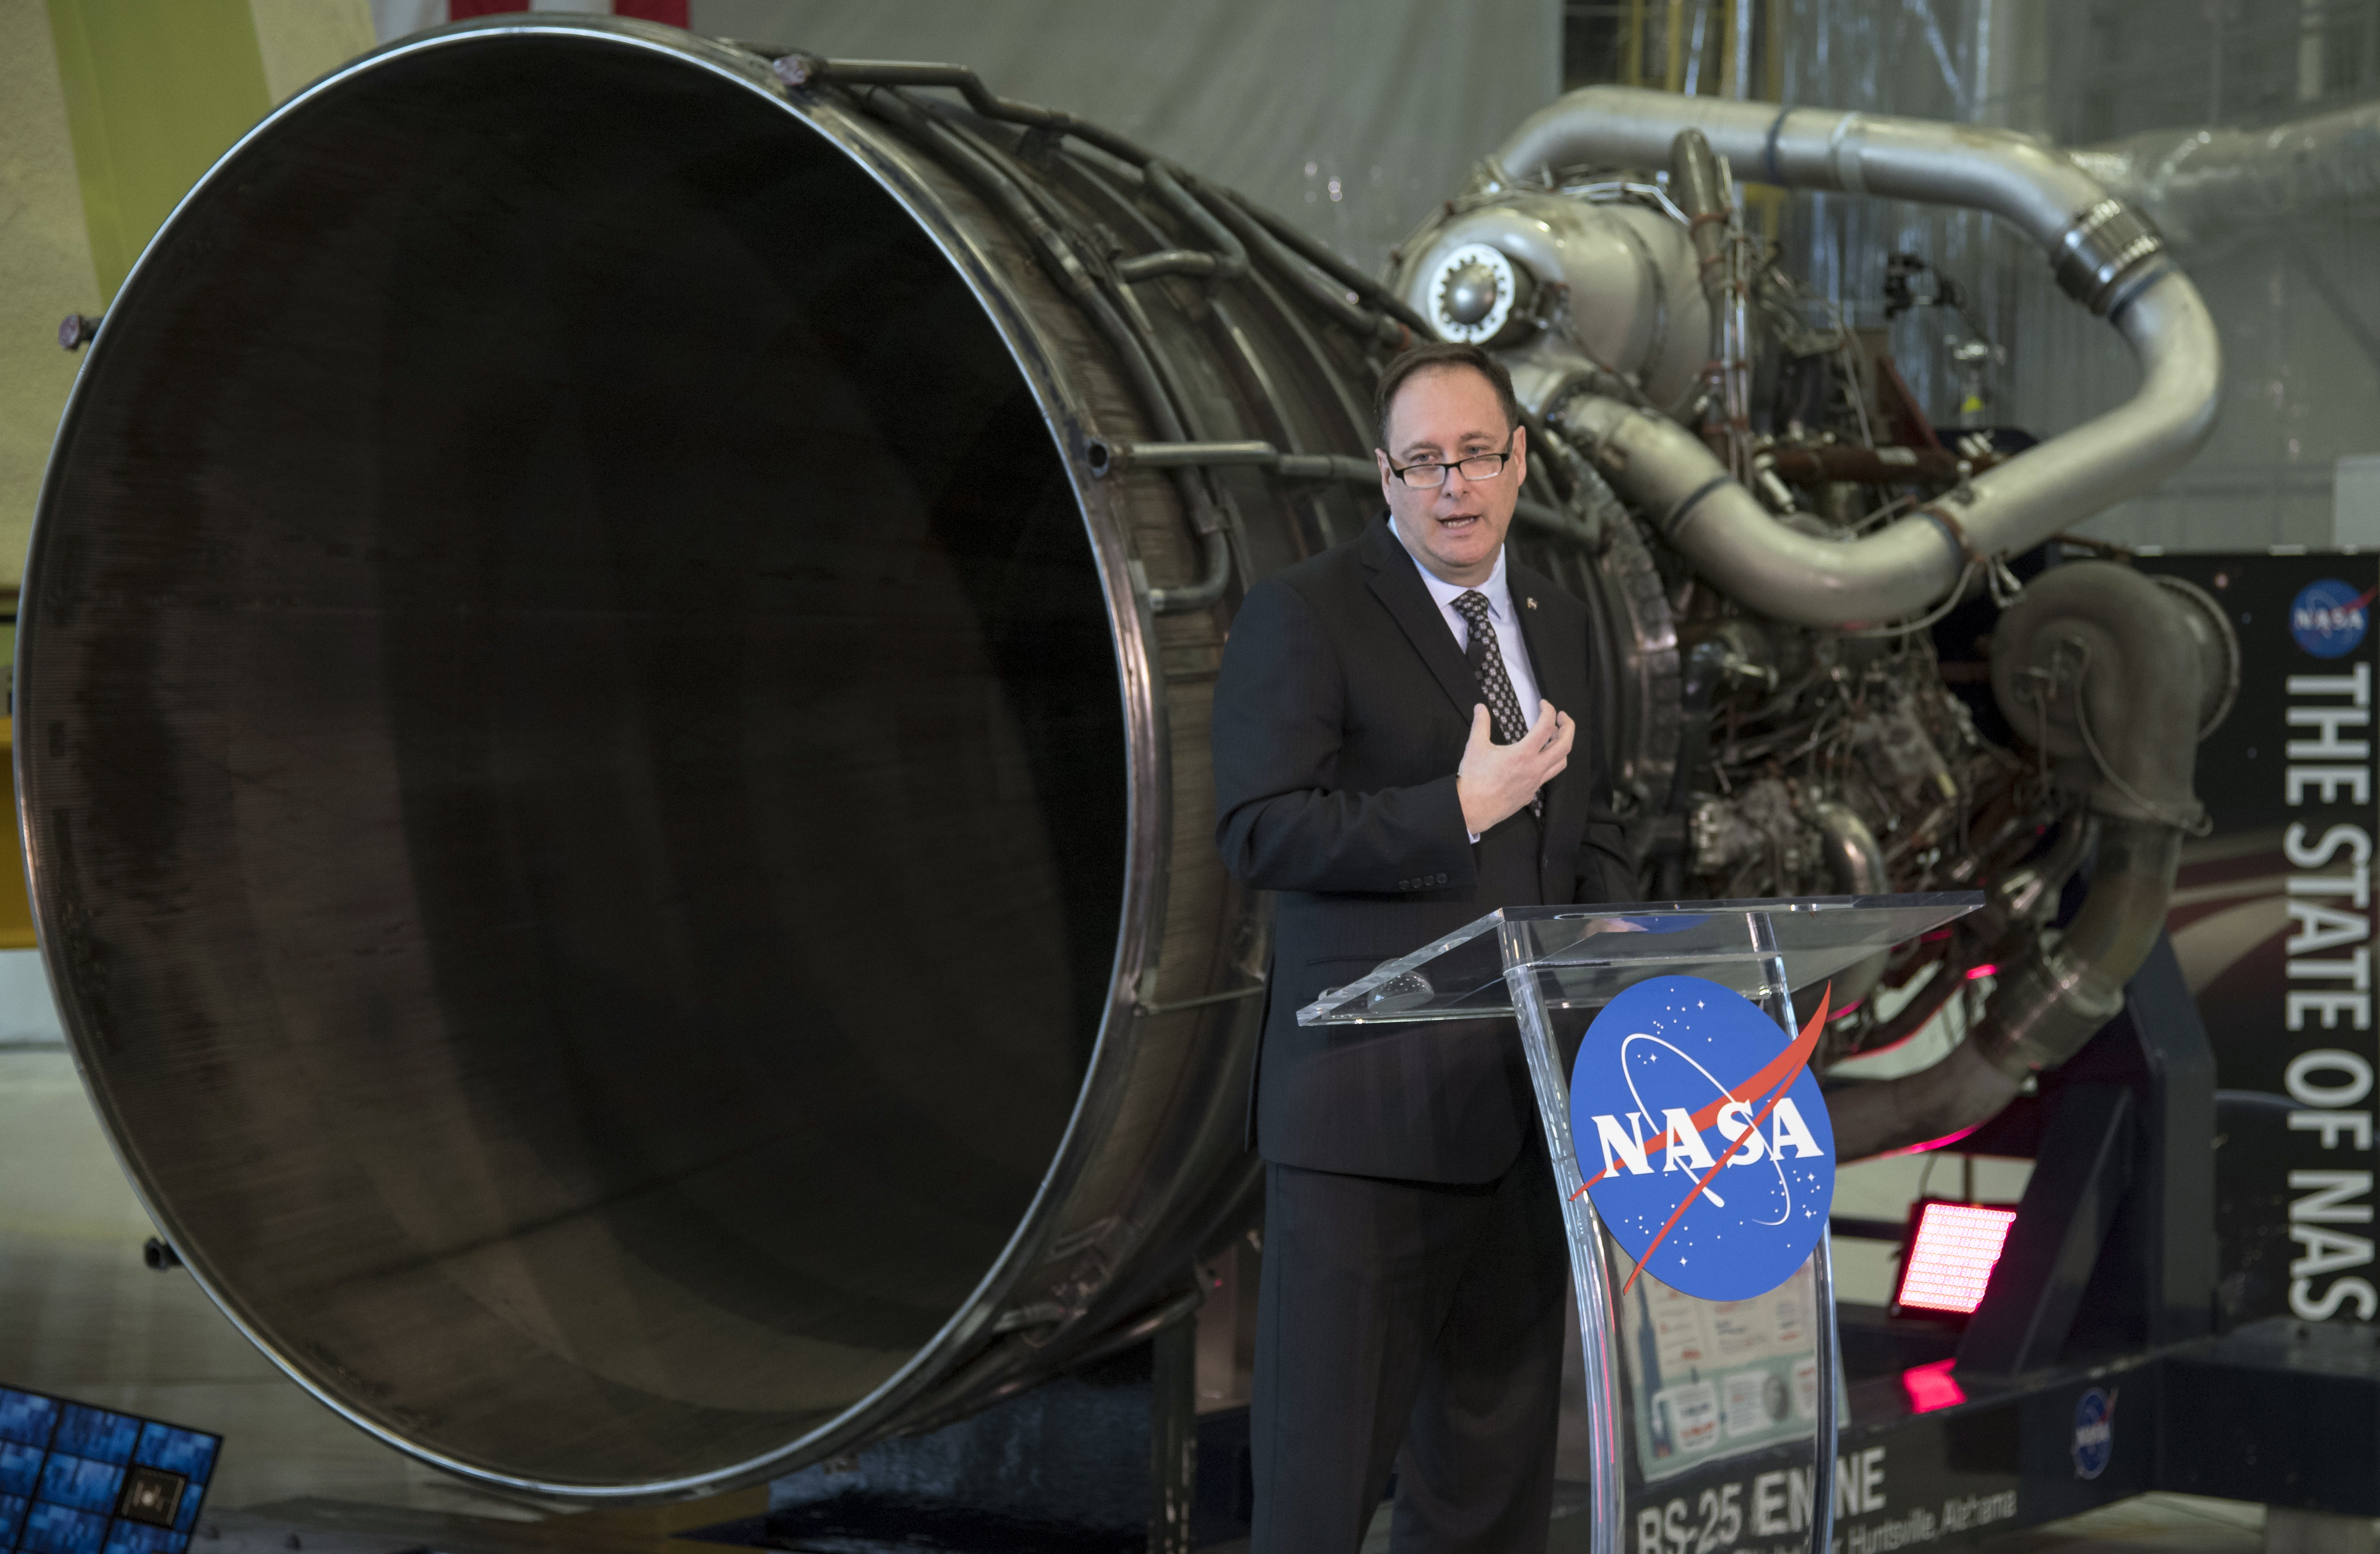 Nasa Administrator Robert Lightfoot discusses the fiscal year 2019 budget proposal during a State of NASA address on Monday at Marshall Space Flight Centre in Alabama (Bill Ingalls/NASA/AP)